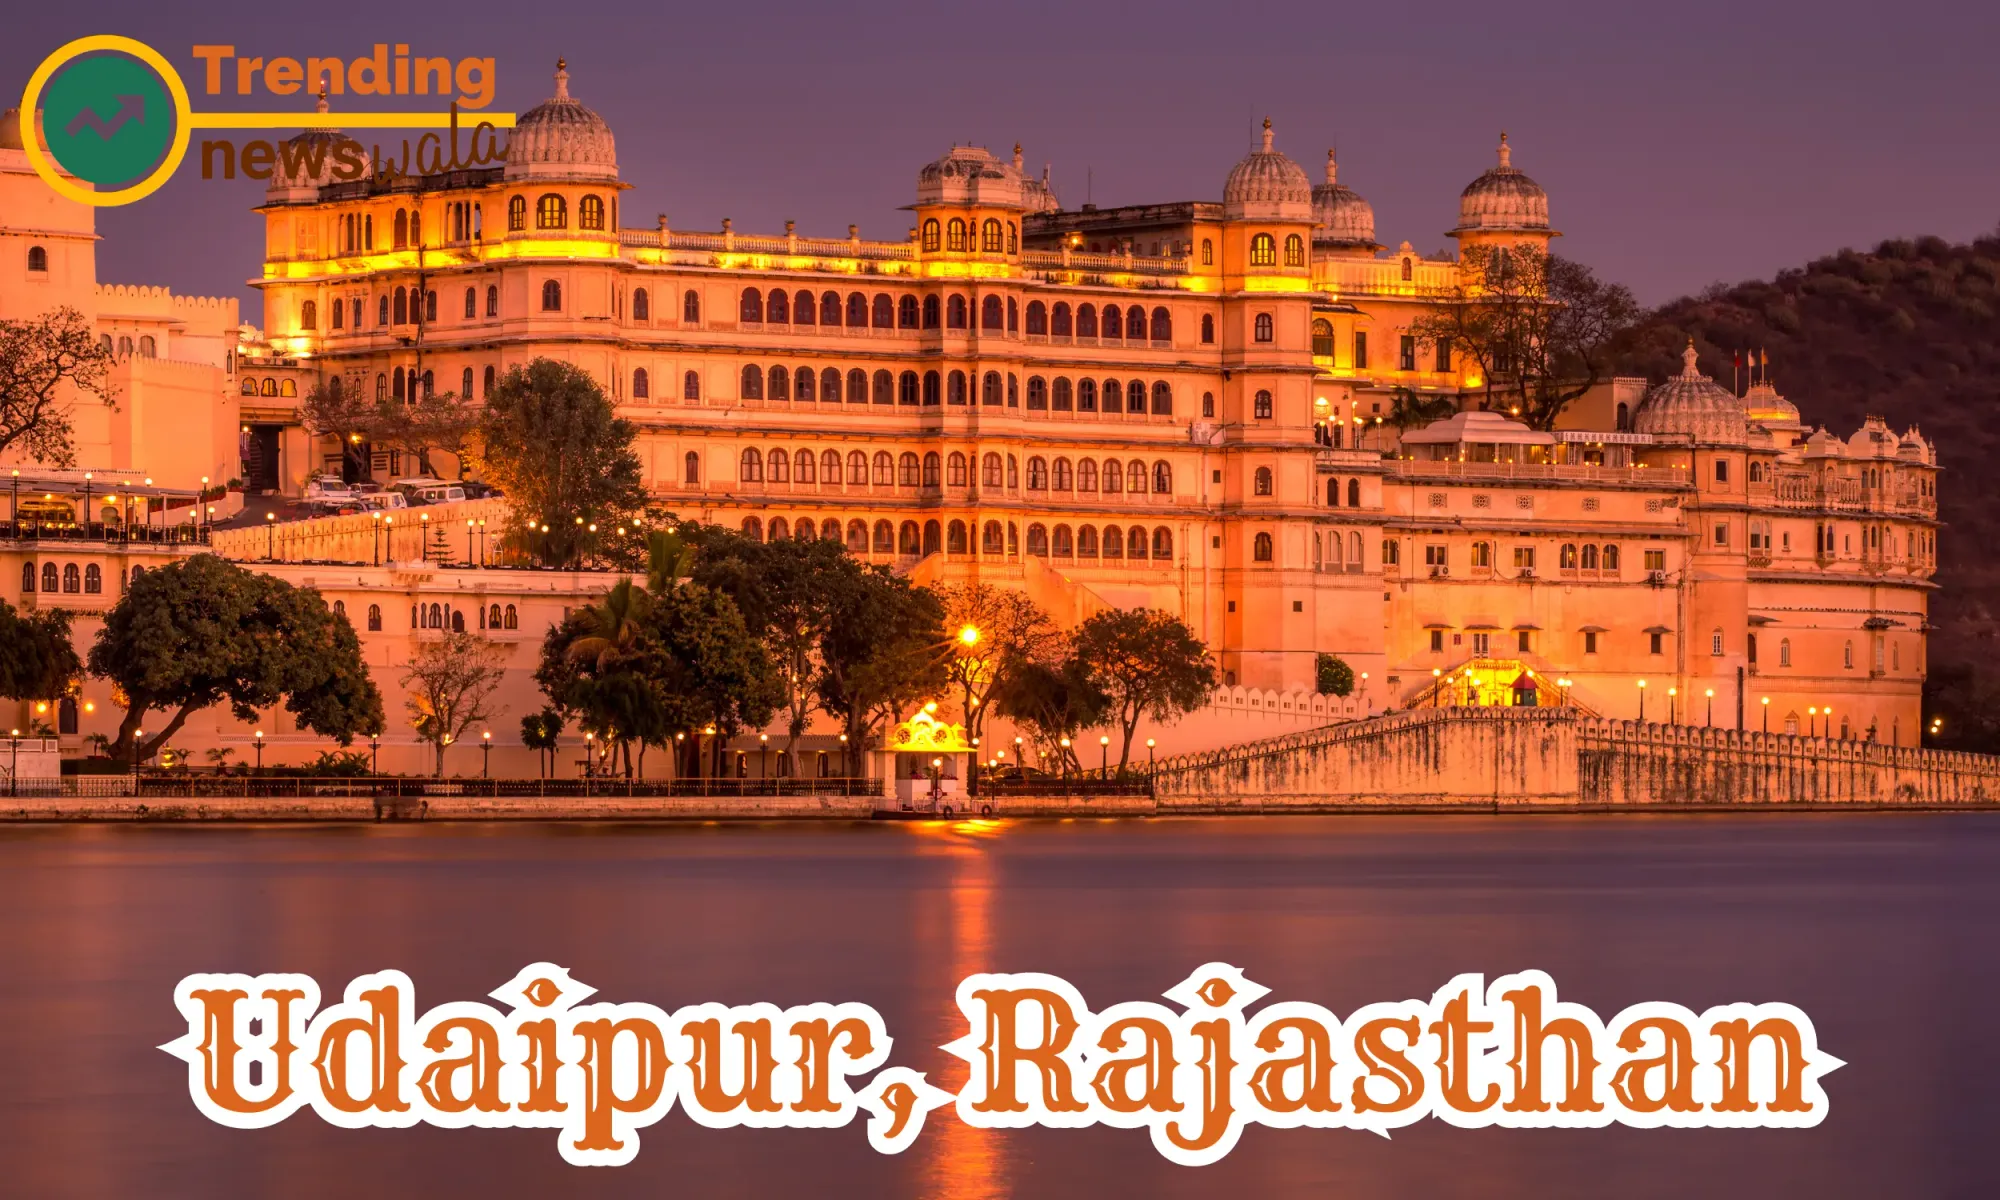 Certainly! Udaipur, located in the western Indian state of Rajasthan